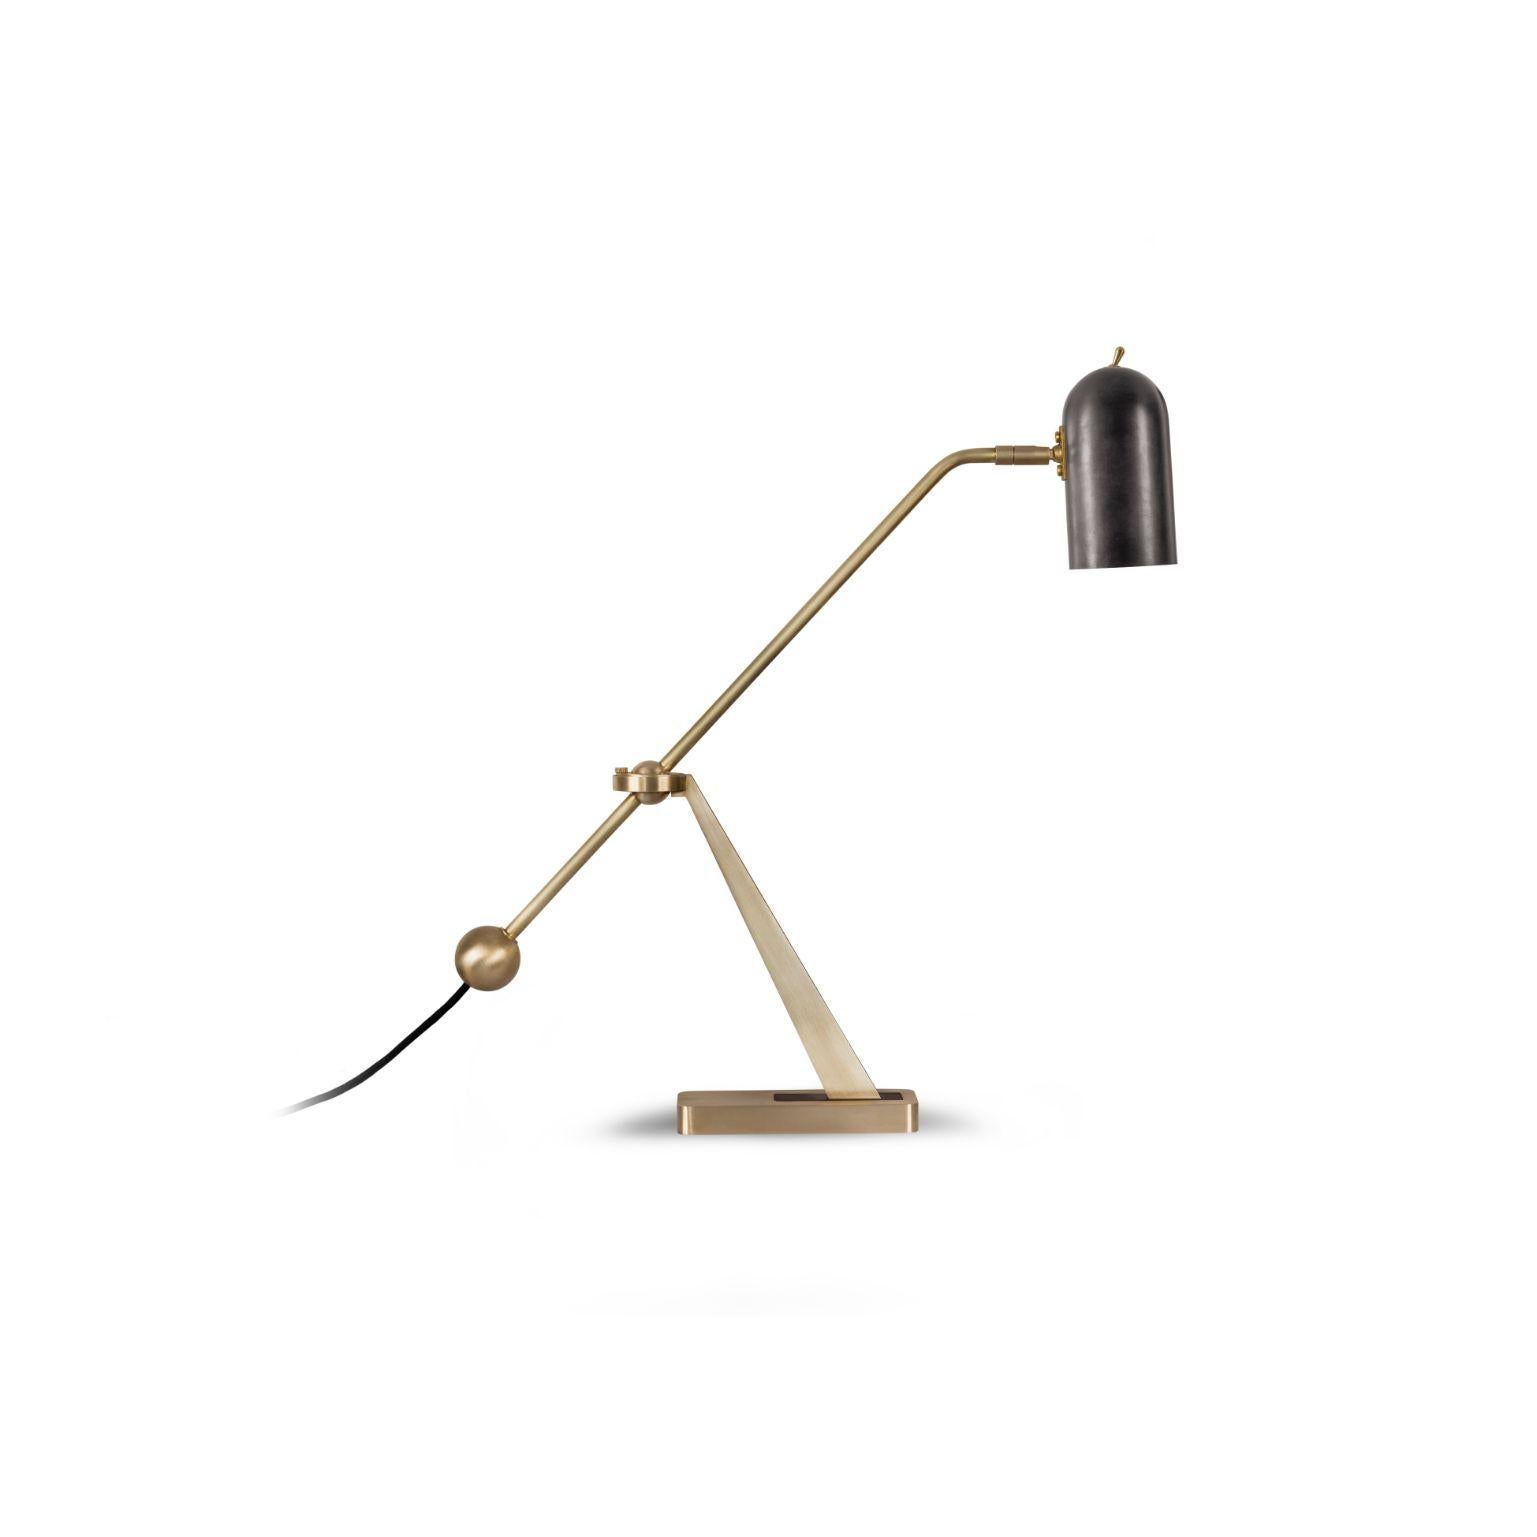 Stasis floor light - brass + bronze by Bert Frank
Dimensions: 48 x 50 x 7 cm
Materials: Brass, dark bronze

When Adam Yeats and Robbie Llewellyn founded Bert Frank in 2013 it was a meeting of minds and the start of a collaborative creative